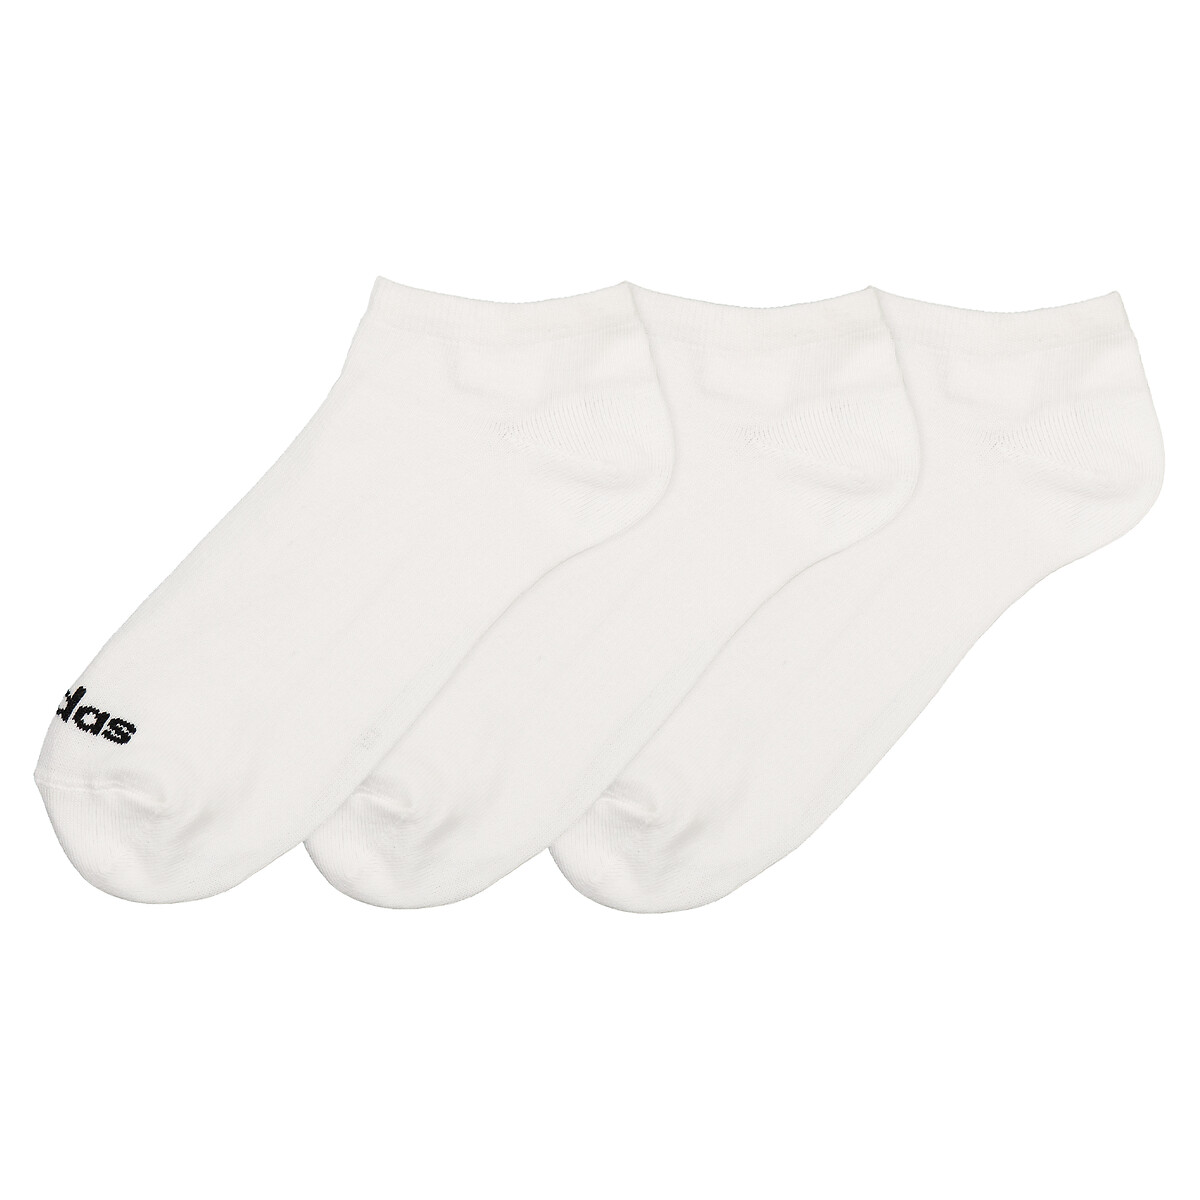 Pack of 3 Pairs of Trainer Socks